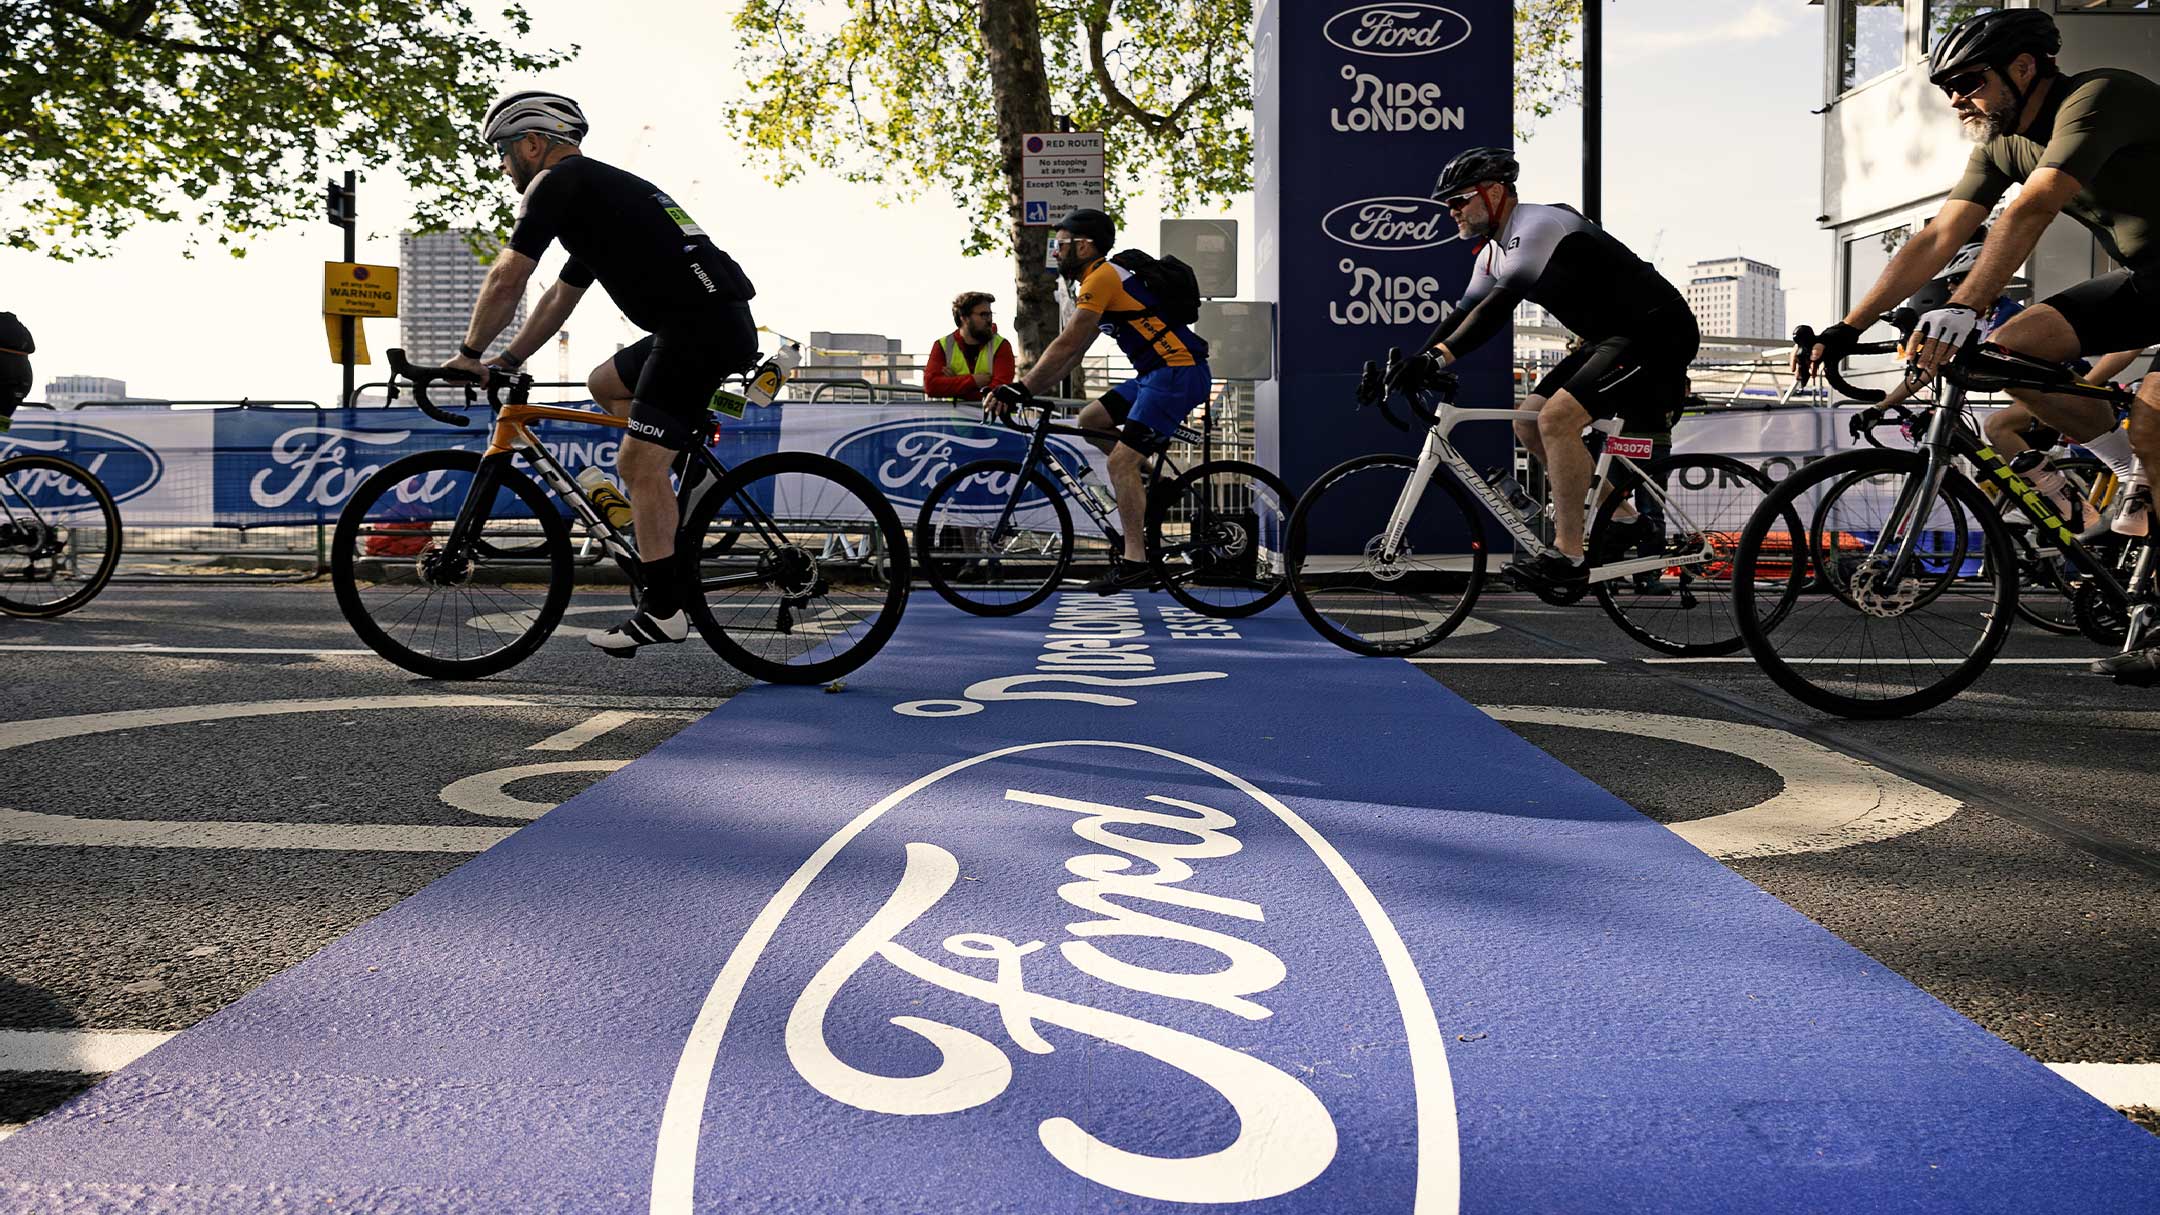 Bicycle rides and Ford logo